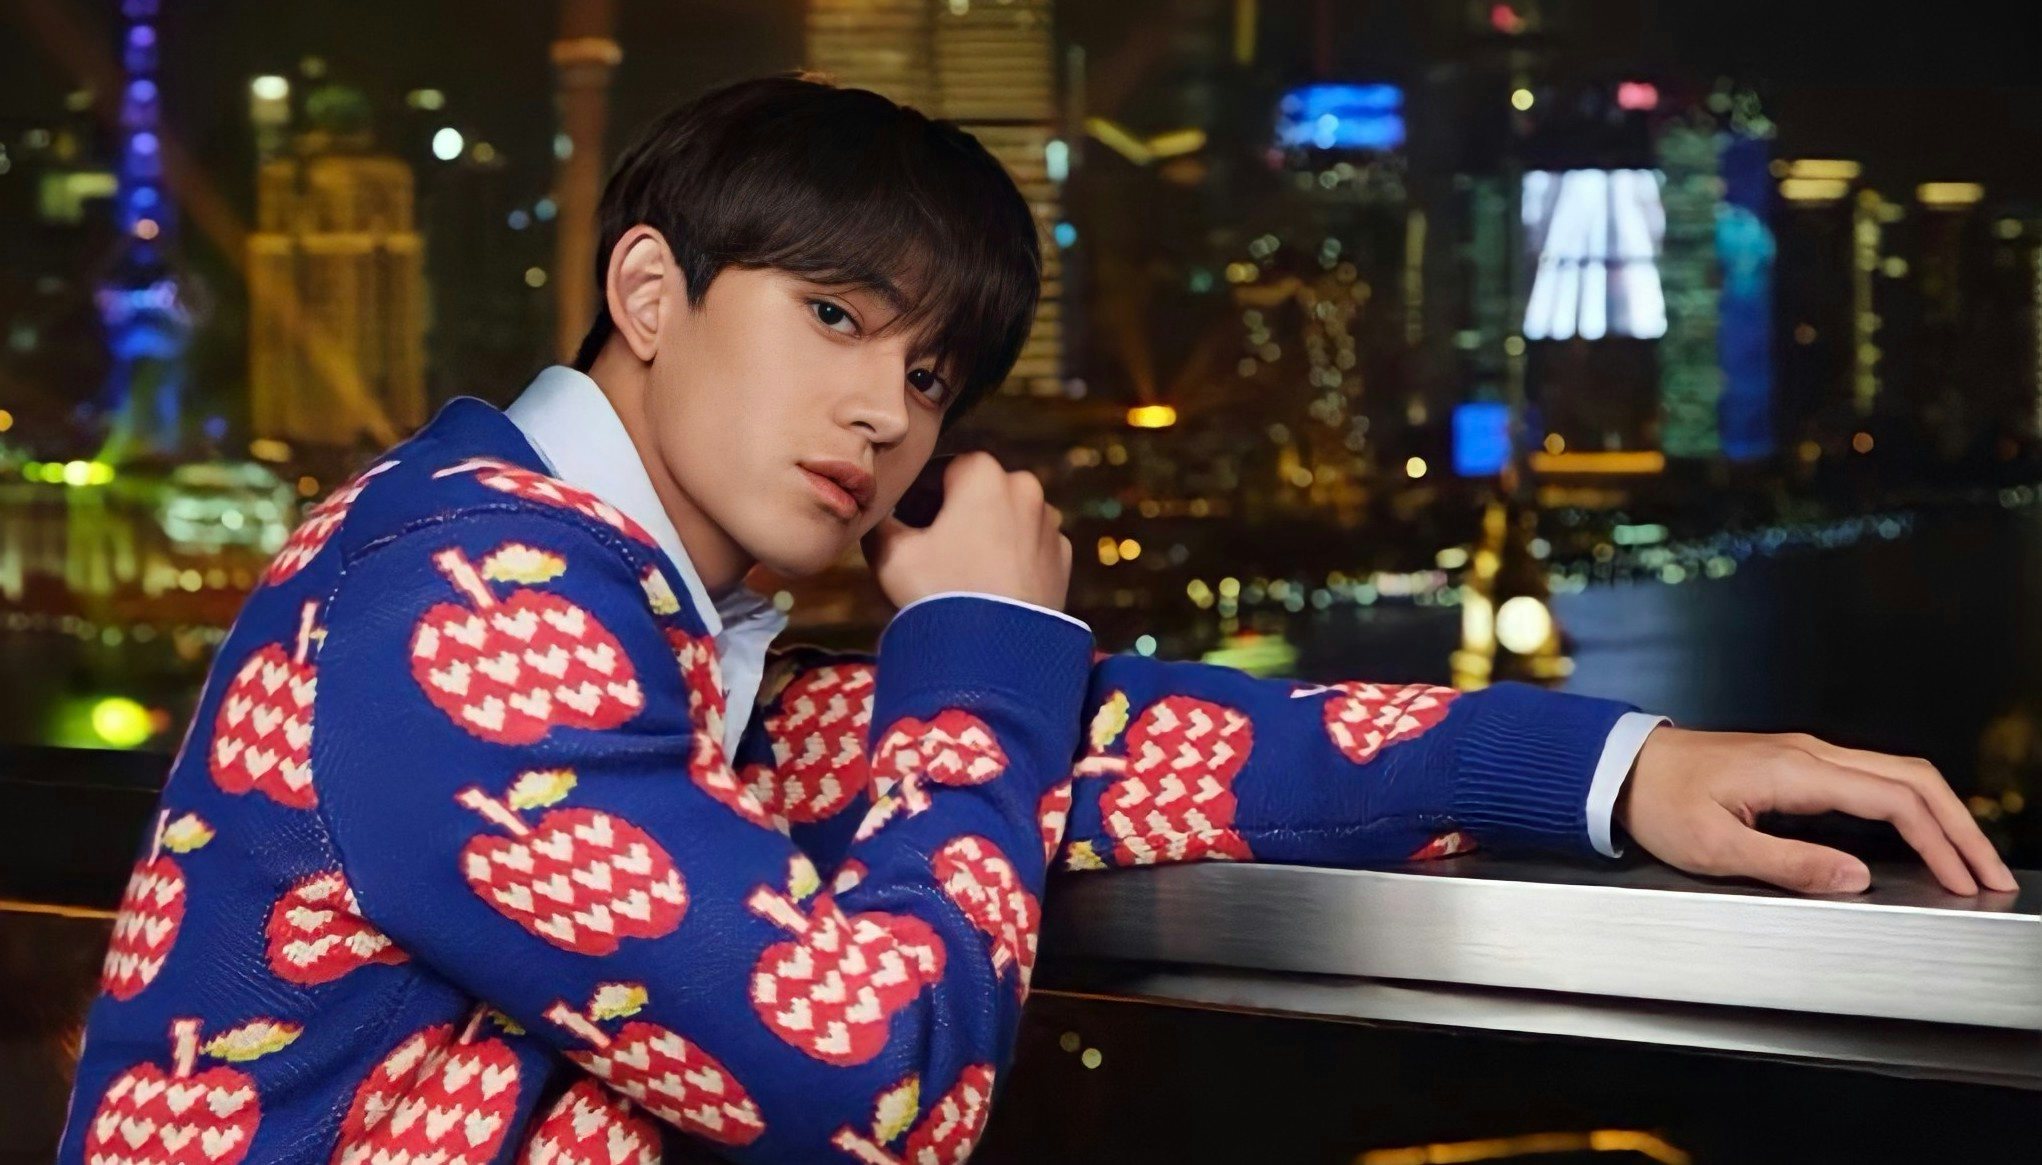 After Kris Wu and Zhang Zhehan, NCT member Lucas Huang has become the latest star embroiled in scandal. How will luxury respond this time? Photo: Gucci